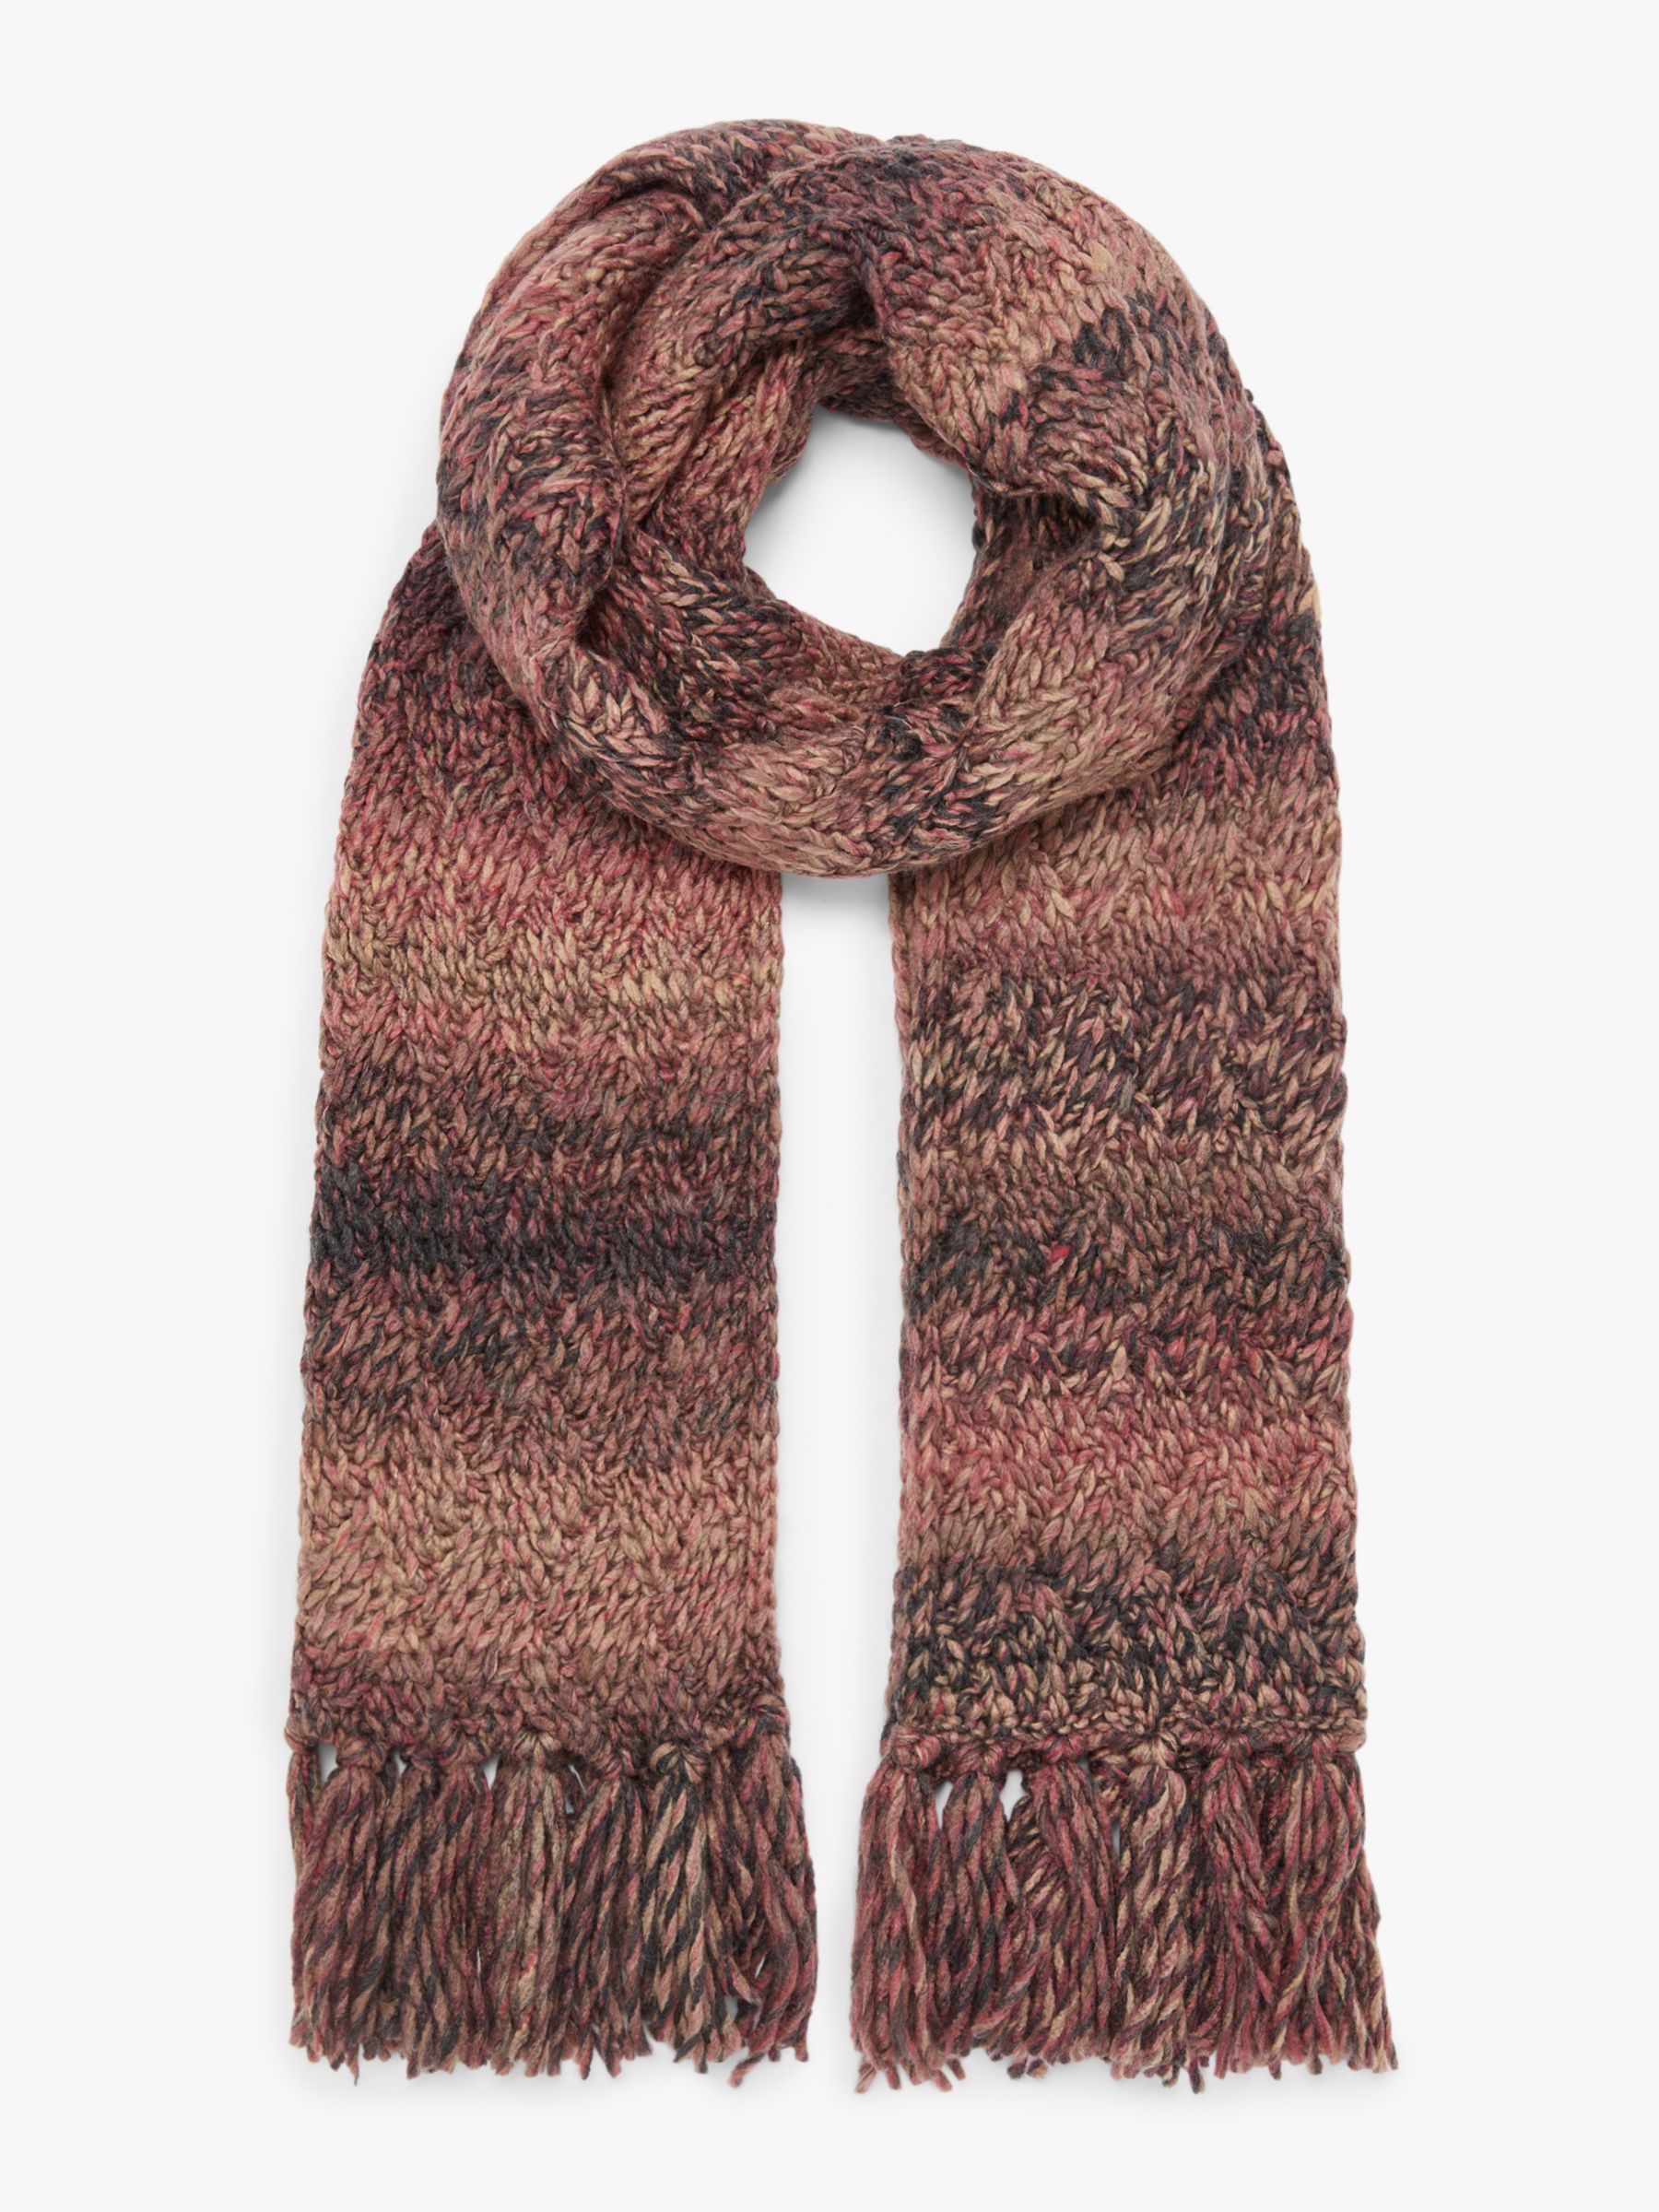 AND/OR Zig Zag Space Rectangular Scarf, Multi